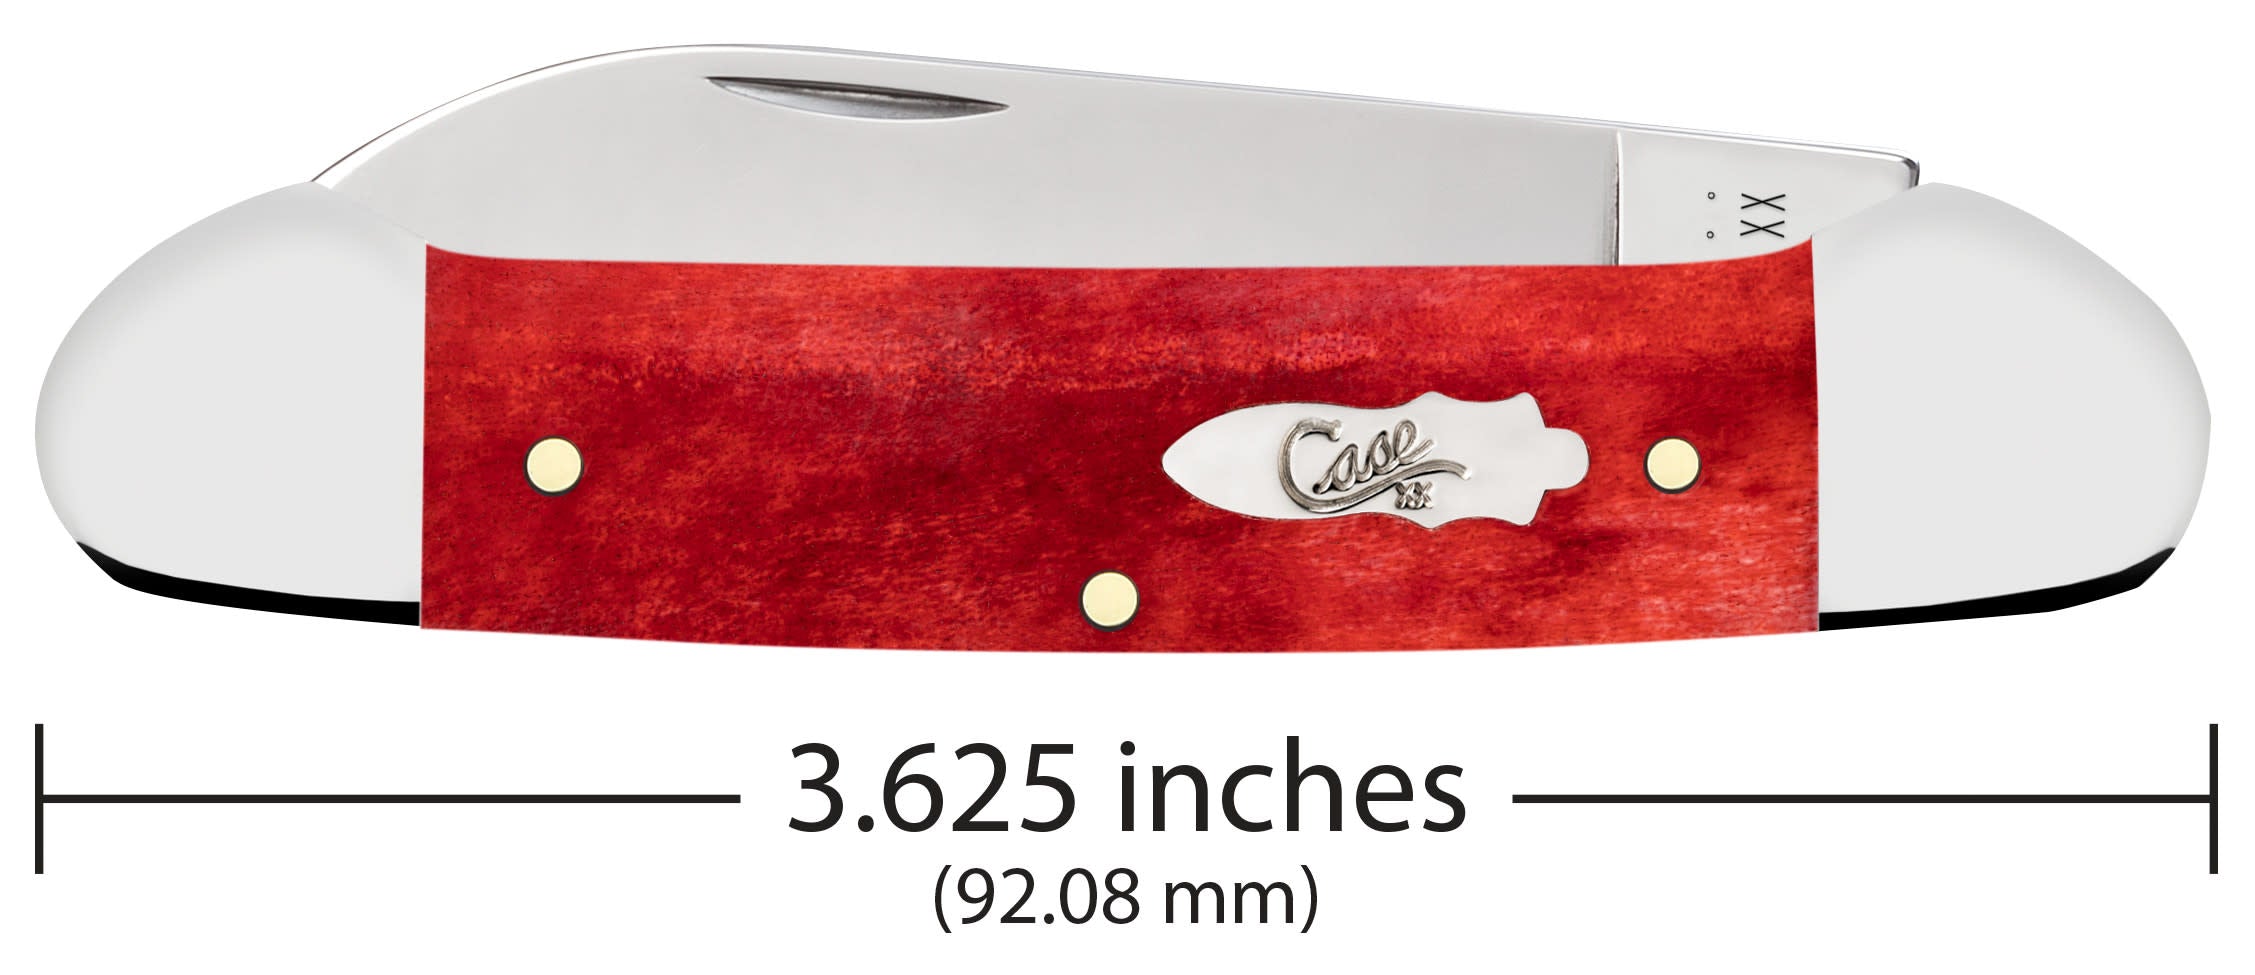 Smooth Old Red Bone Canoe Knife Dimensions